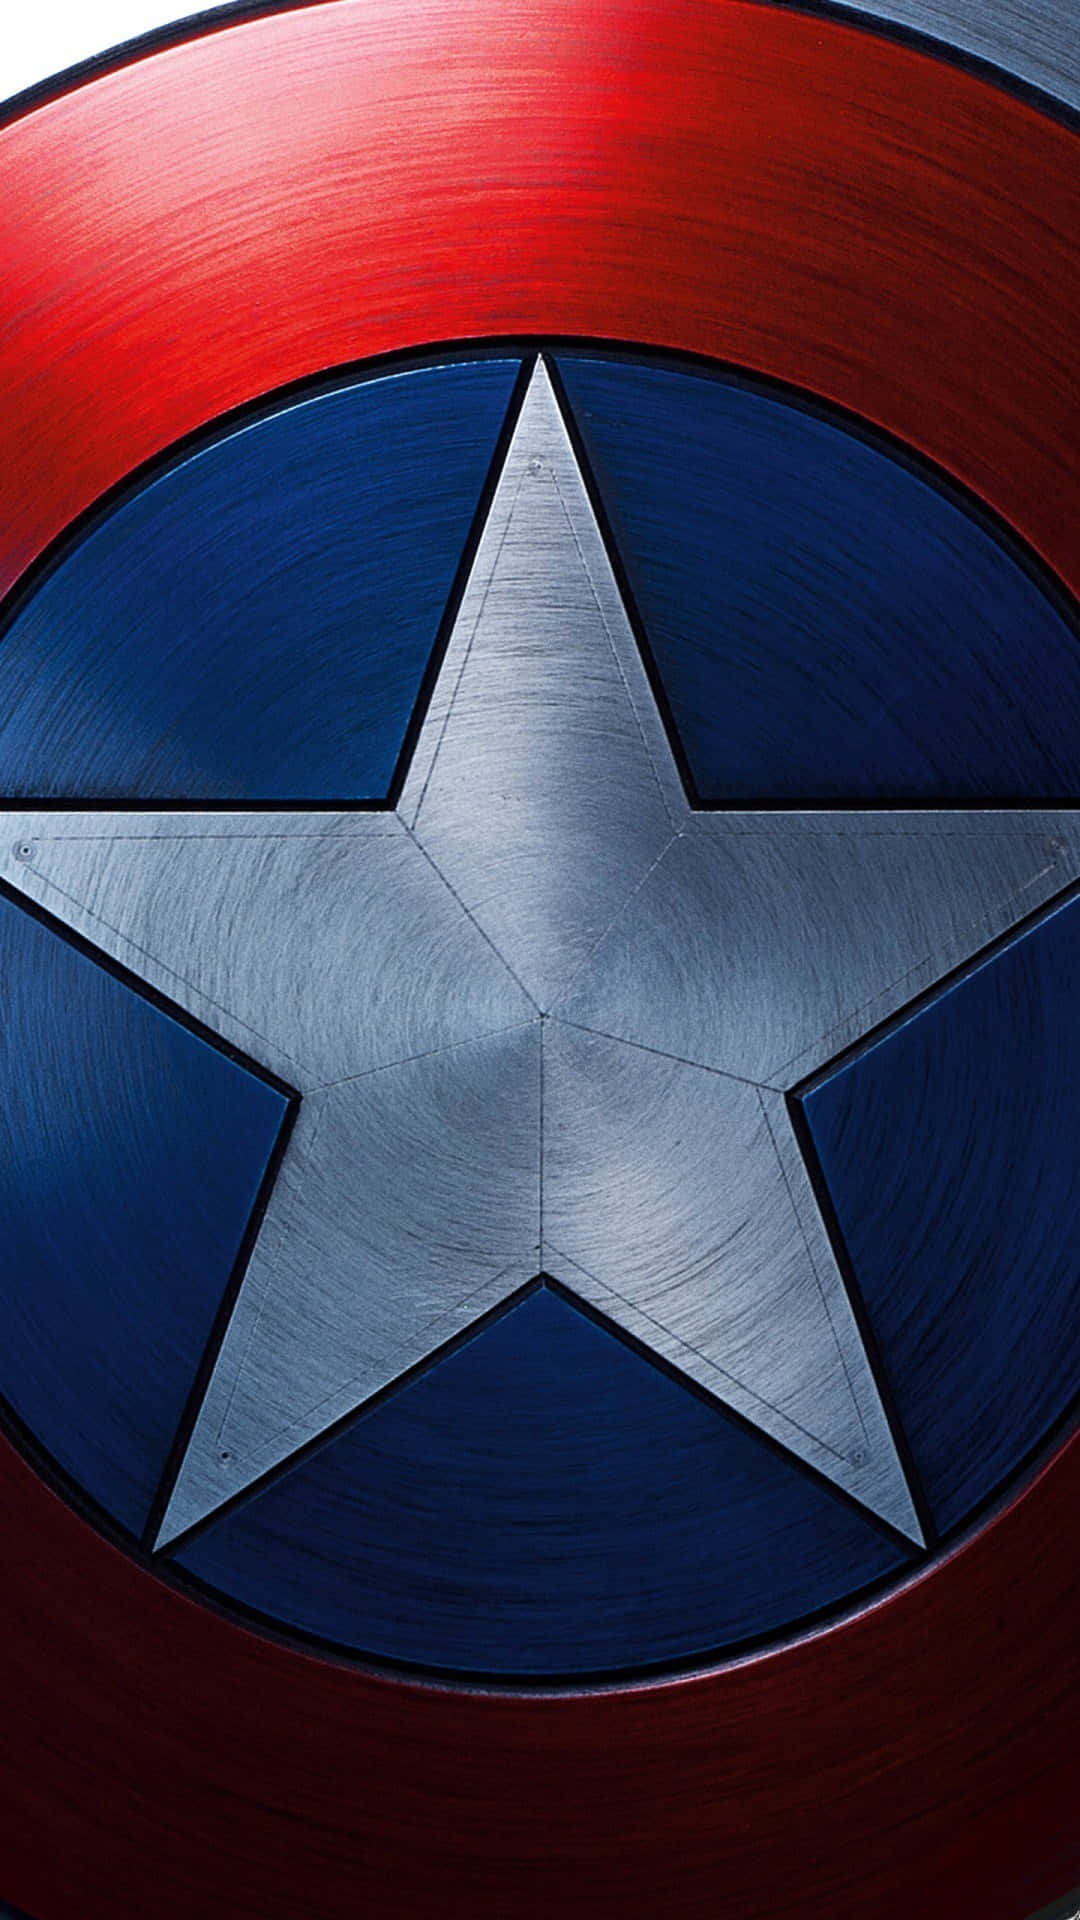 Get ready like Captain America with this Android Wallpaper